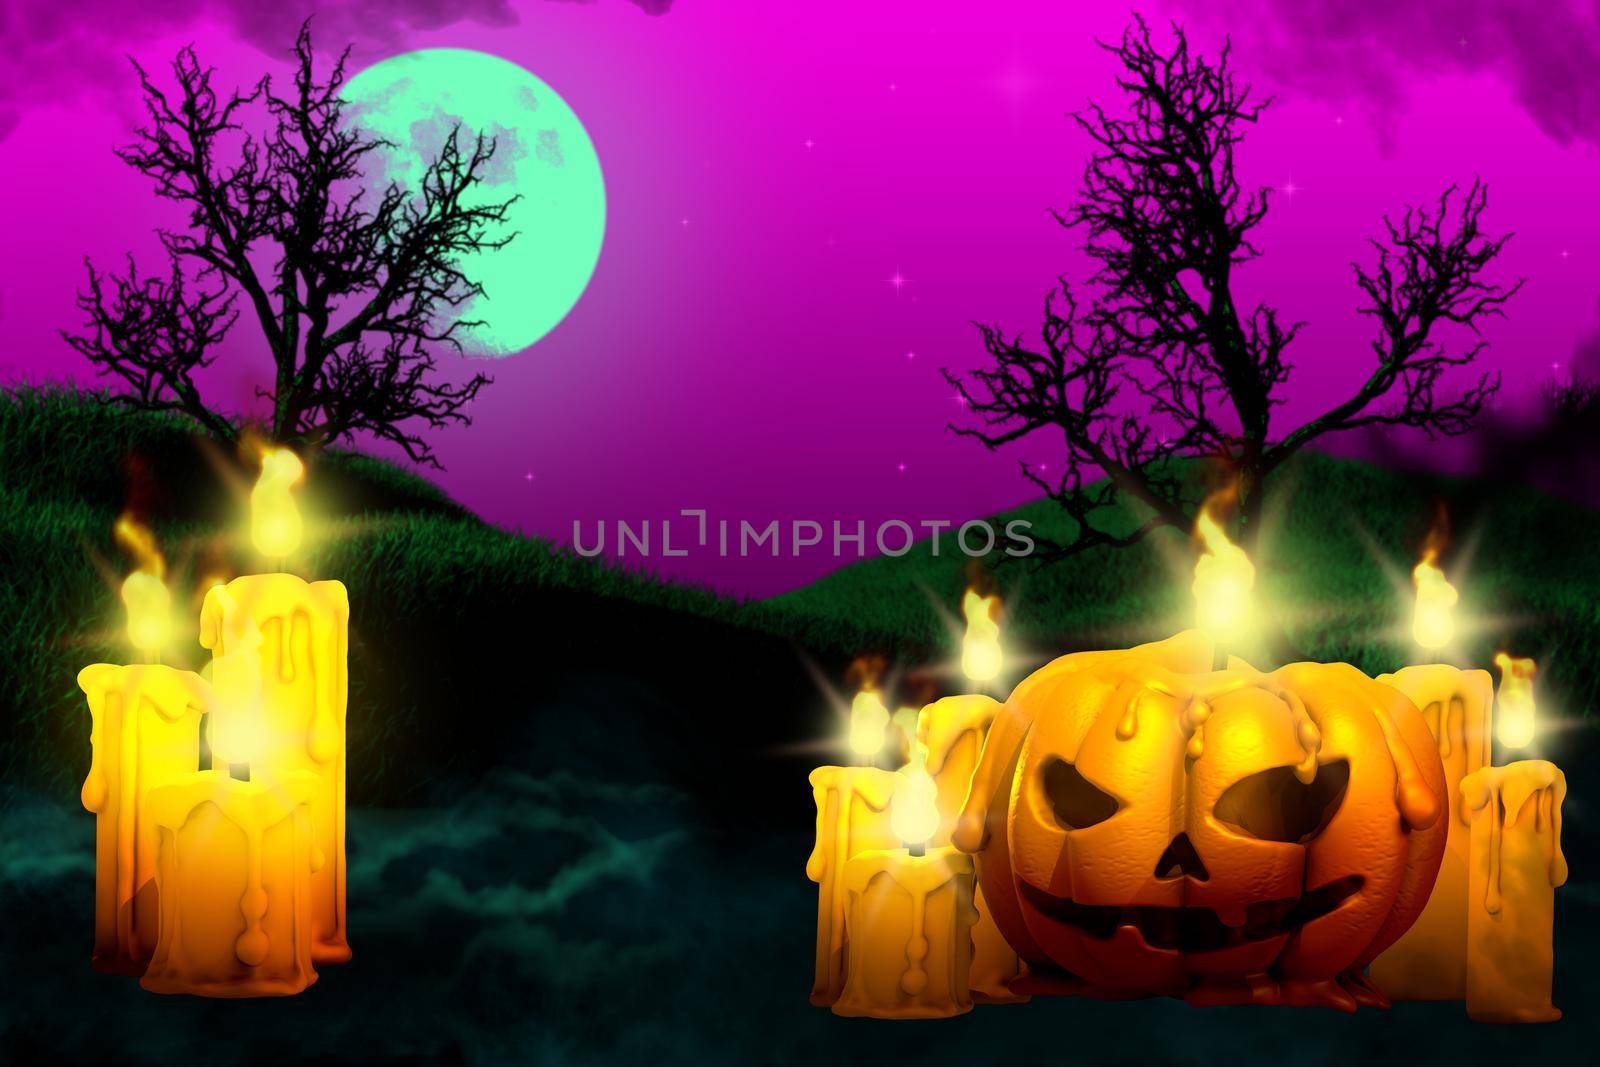 Halloween colorful haunting night texture - set of candles on left side and candle in pumpkin style on right side, trick or treat concept - background design template 3D illustration by Antozzr